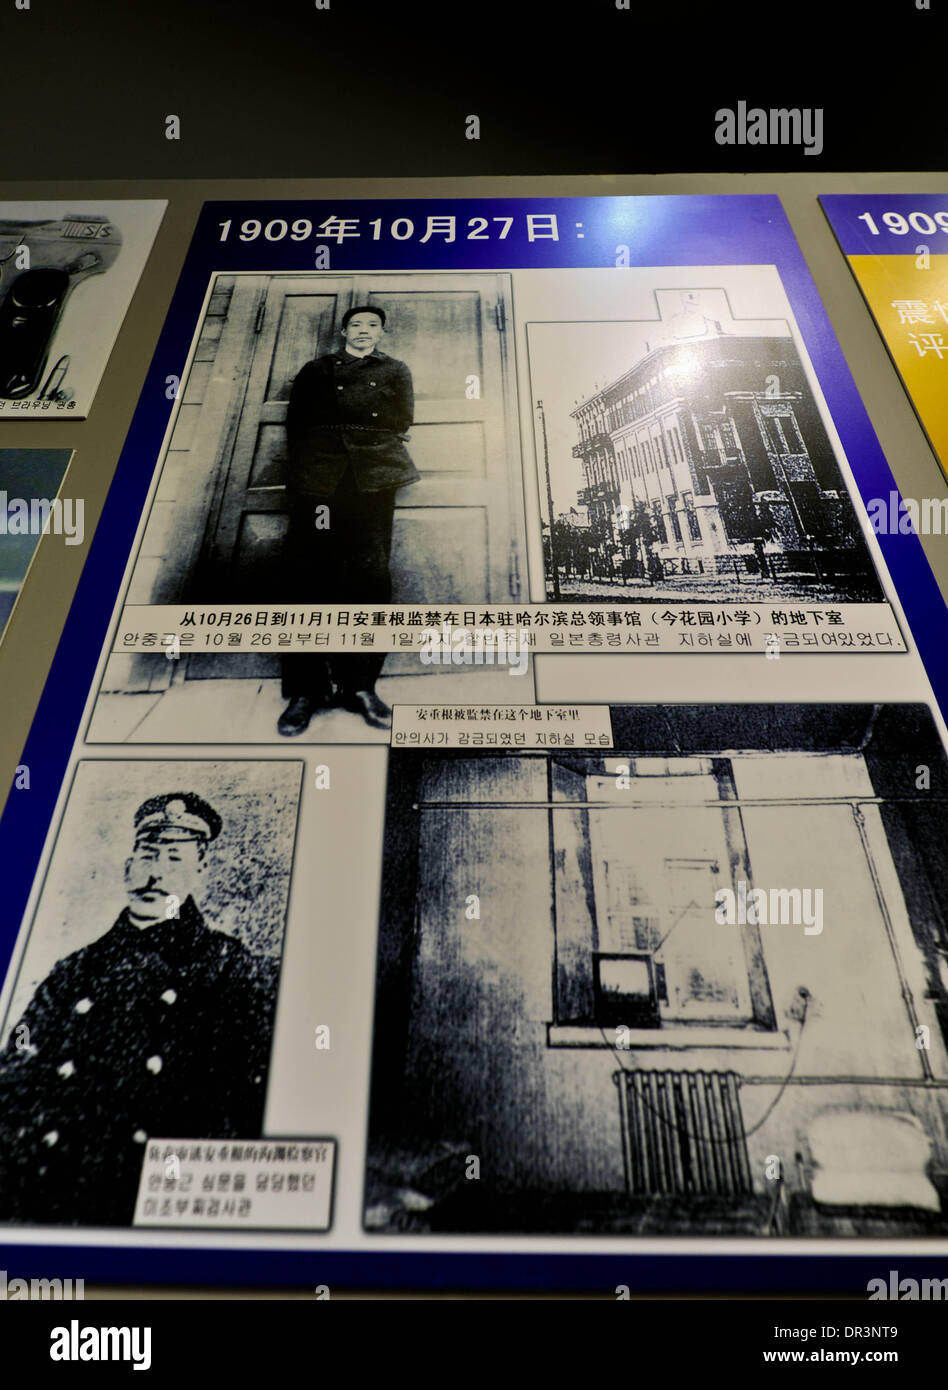 Harbin, Japan four times before becoming resident-general of Korea in 1905. 19th Jan, 2014. Photos are exhibited at a memorial established to commemorate the Korean patriot Ahn Jung Geun at Harbin Railway Station, Jan. 19, 2014. Ahn shot dead Hirobumi Ito, who had served as the prime minister of Japan four times before becoming resident-general of Korea in 1905, at Harbin railway station on Oct. 26, 1909. The memorial hall, opened on Sunday, consists of exhibition rooms telling the story of Ahn's life, and shows the exact spot where the shooting took place. © Wang Song/Xinhua/Alamy Live News Stock Photo